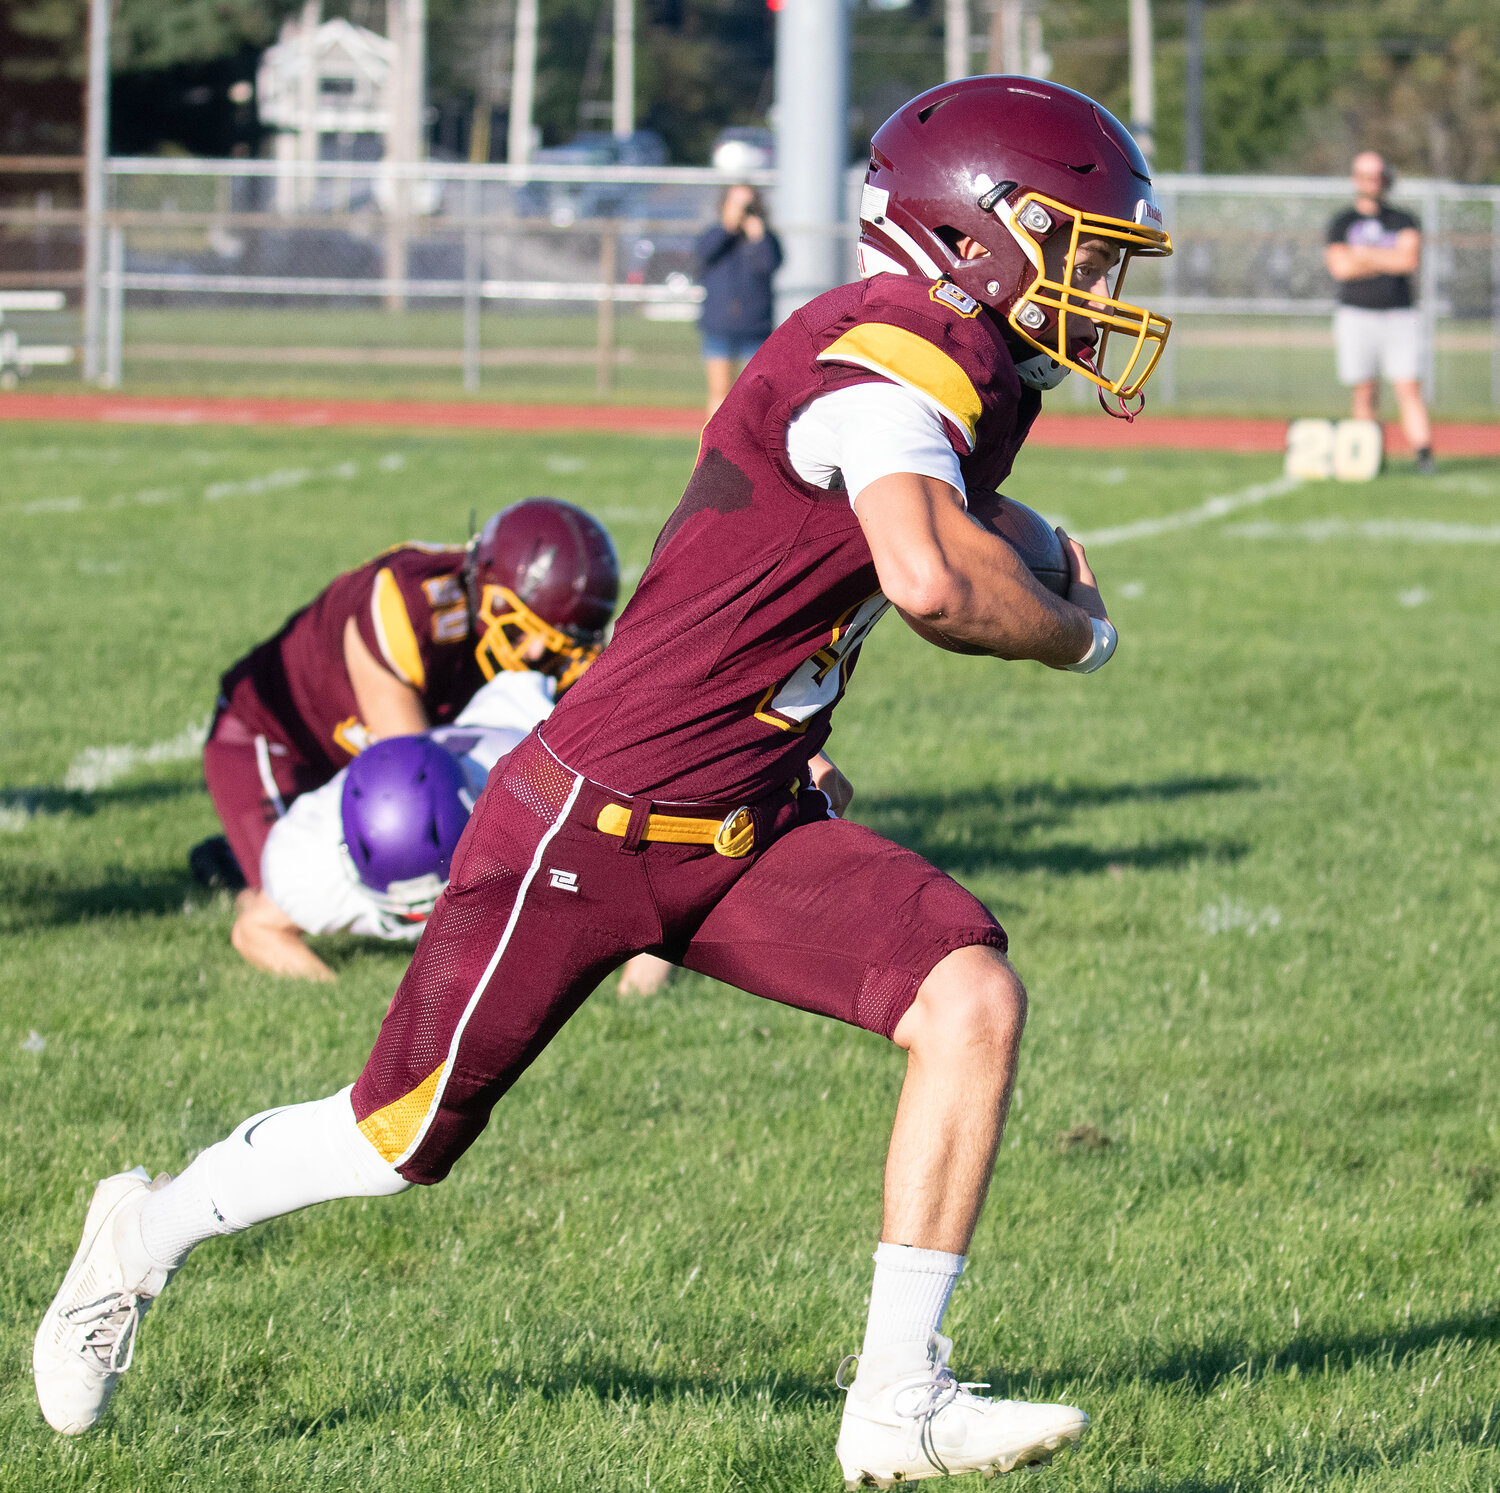 Quarterback Ben Troia runs for a Tigers' first down on a keeper.